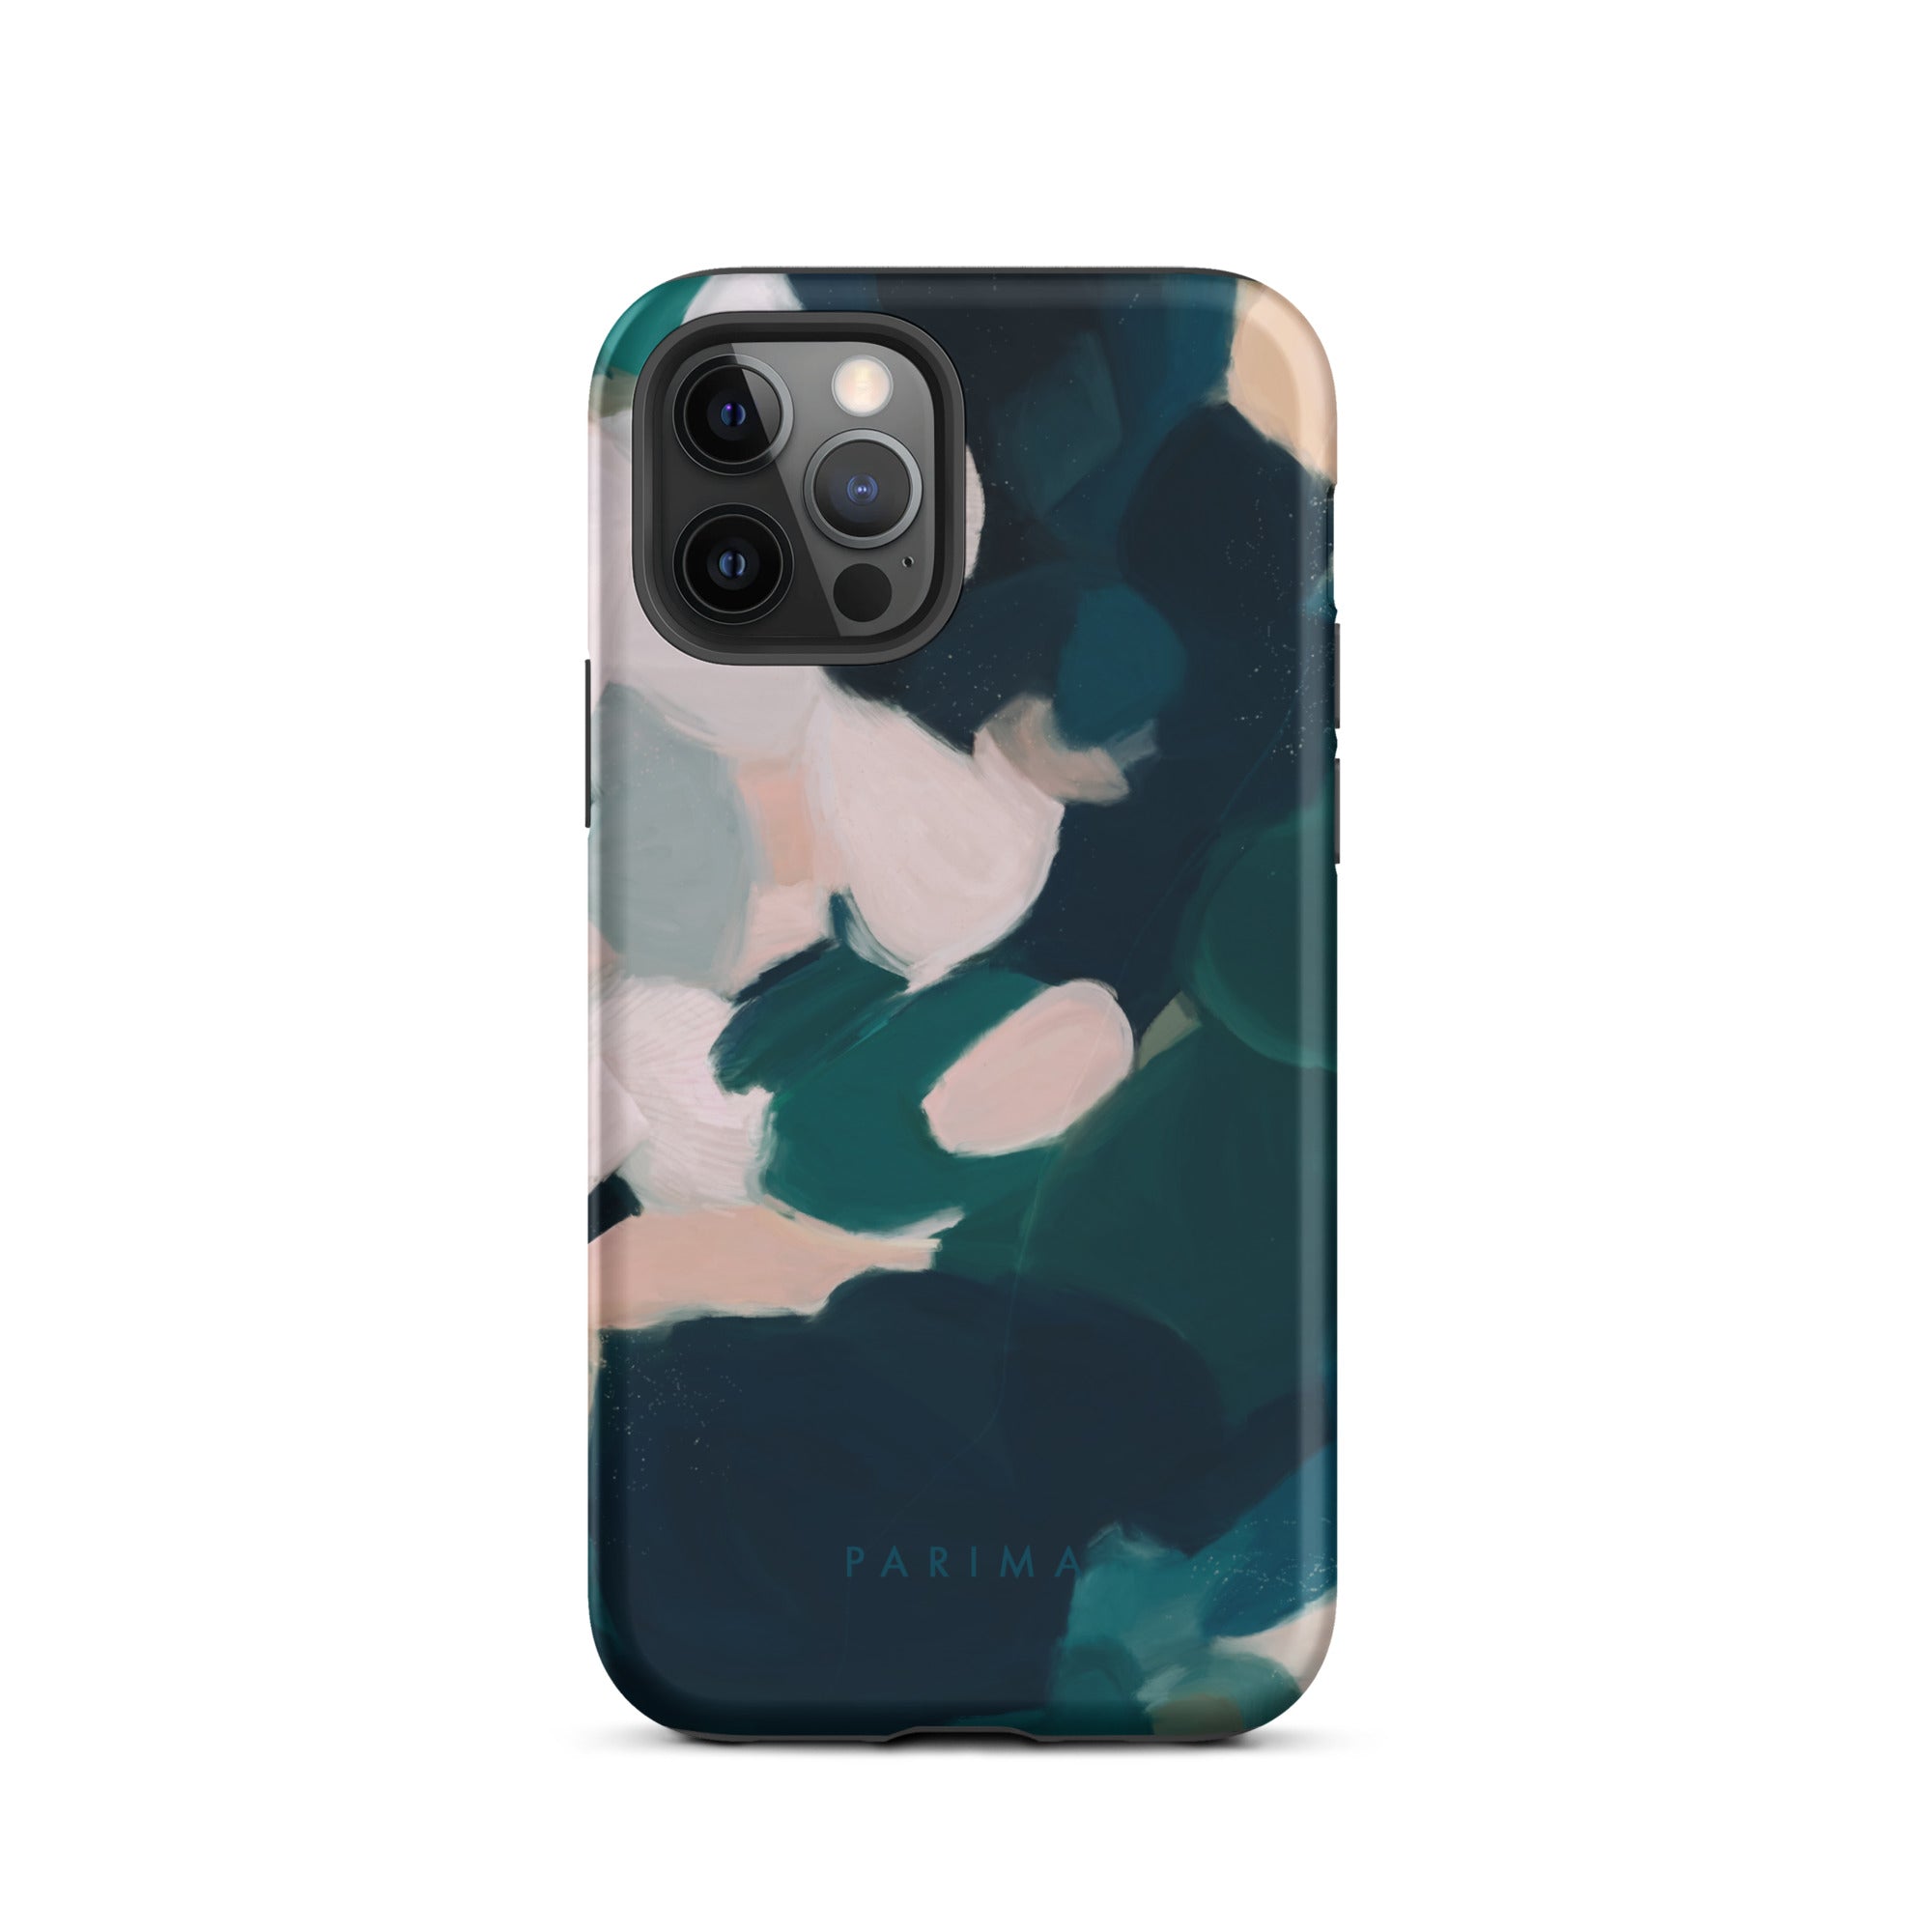 Aerwyn, green and pink abstract art - iPhone 12 Pro tough case by Parima Studio